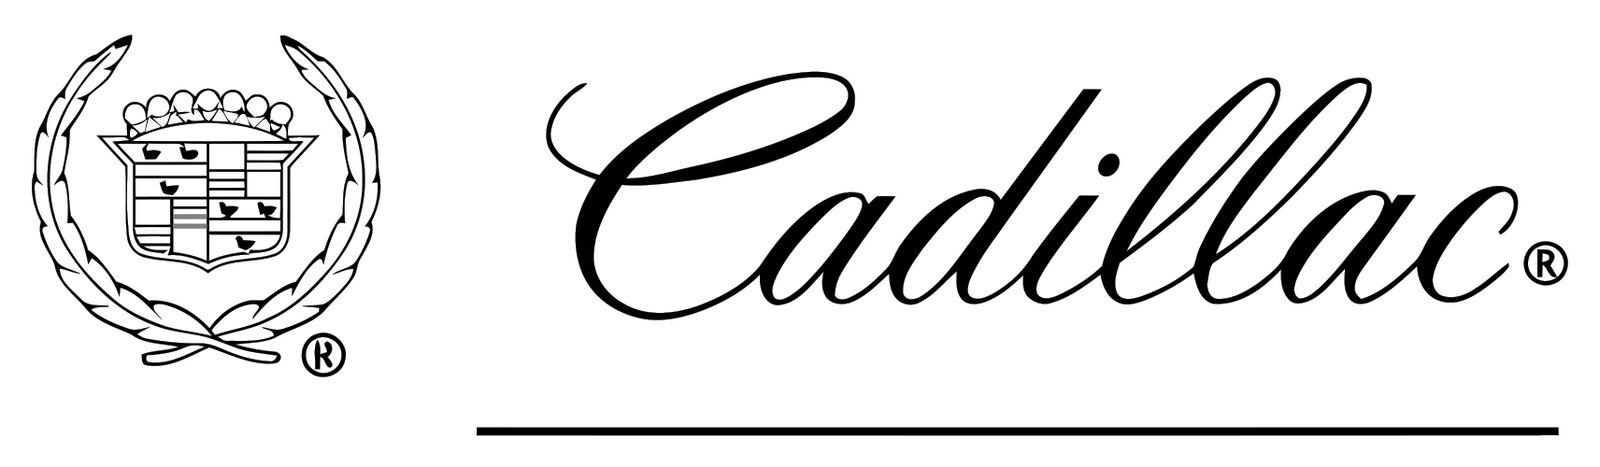 CADILLAC Side LOGO EMBLEM  Sticker / Vinyl Decal  | 10 Sizes with TRACKING